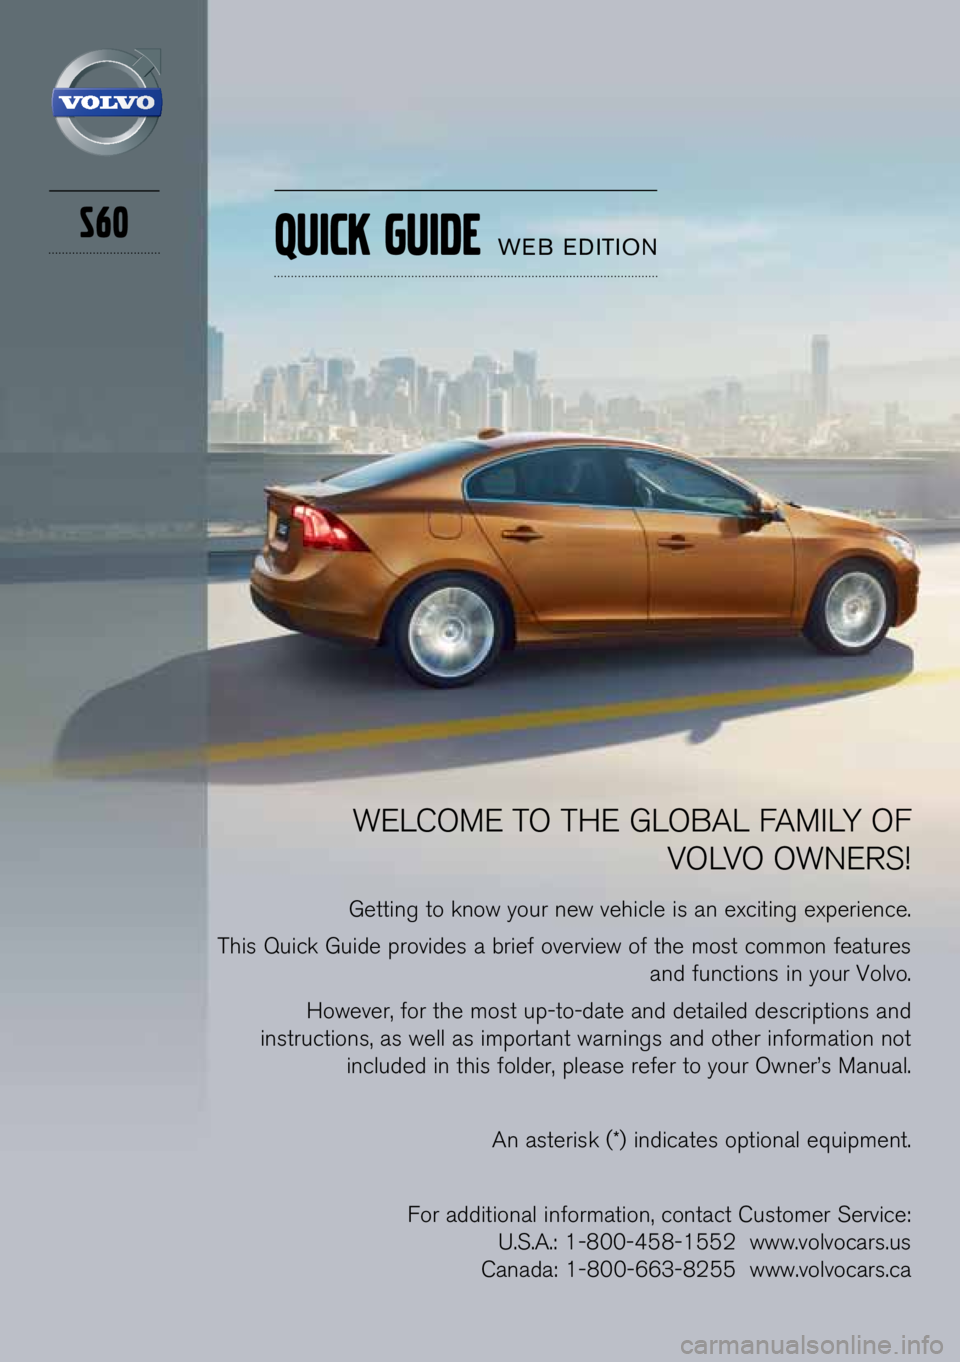 VOLVO S60 2013  Quick Guide S60
WELCOME TO THE GLOBAL FAMILY OF VOLVO OWNERS\f
Getti\bg to k\bow your \bew vehicle is a\b exciti\bg experie\bce.
This Quick Guide provides a brief overview of the most commo\b features  a\bd fu\bc